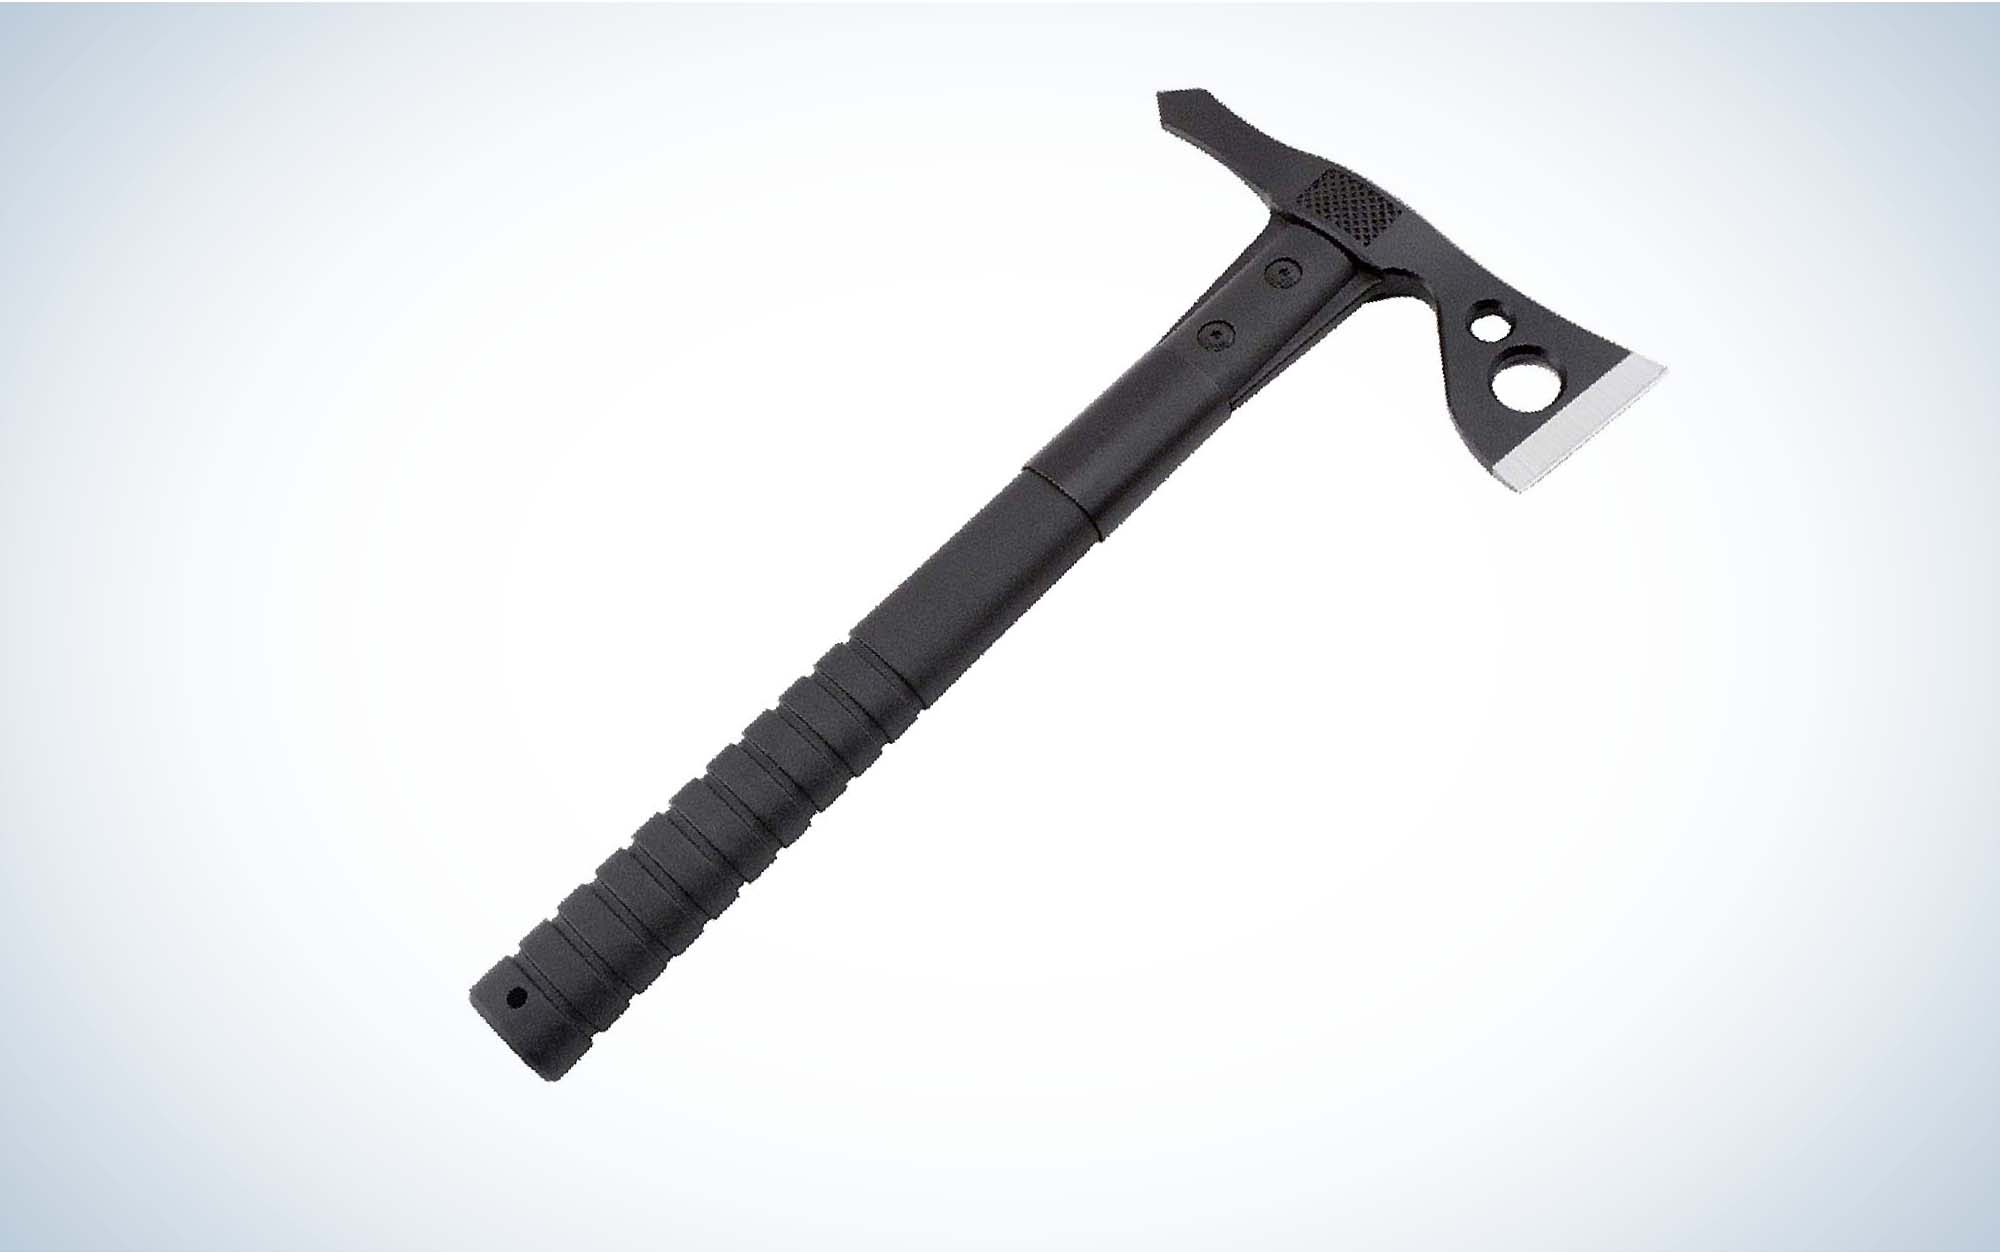 The SOG FastHawk is the best tomahawk for throwing.